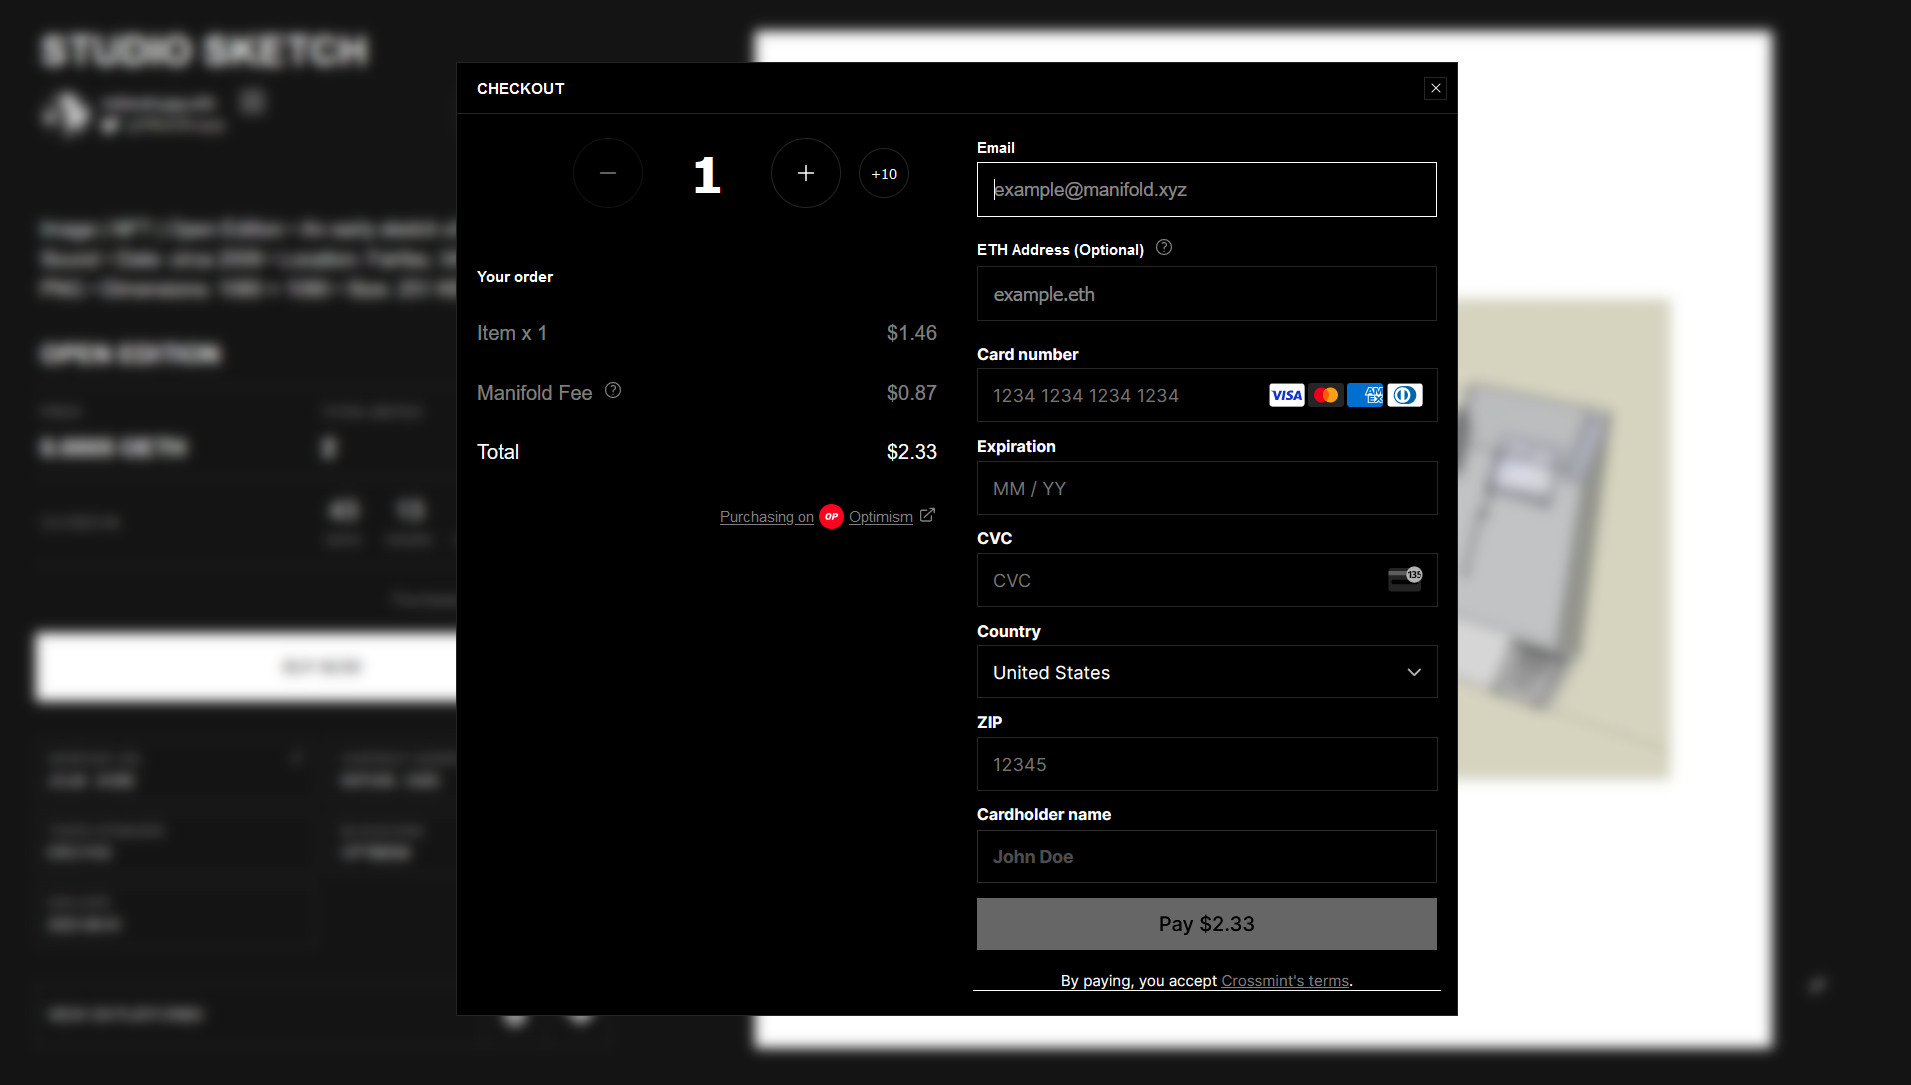 Next screen, with email and Pay by Card options.